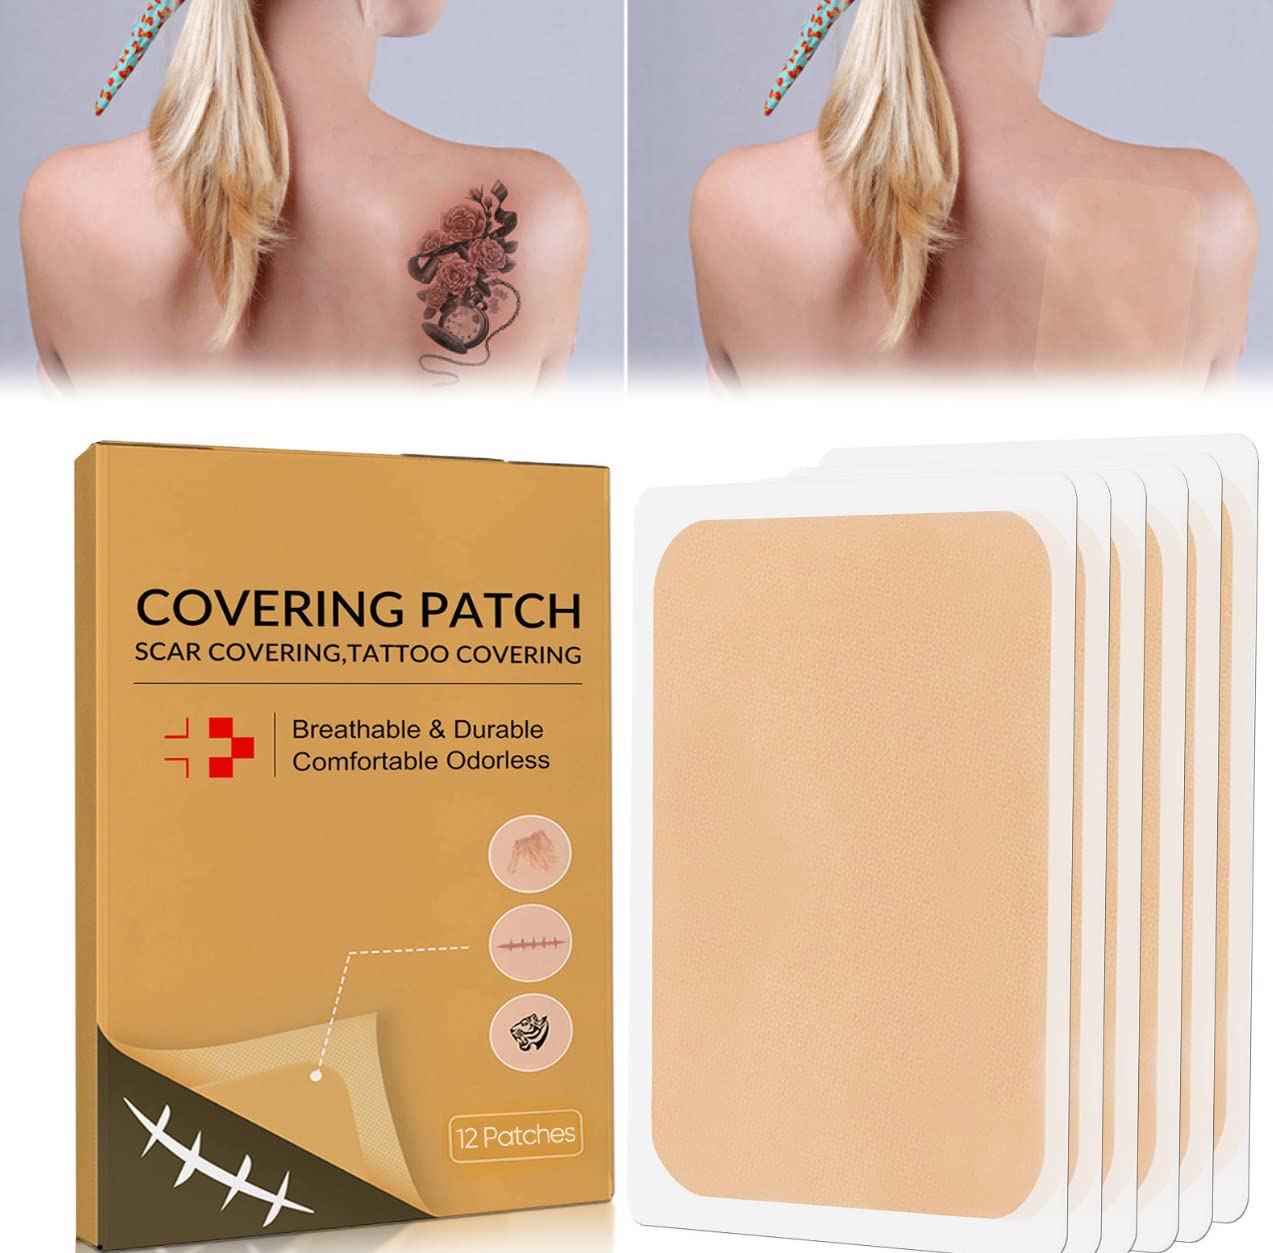 Foundation tape tattoo cover 6 sheet 18 pieces Ocher From Japan | eBay